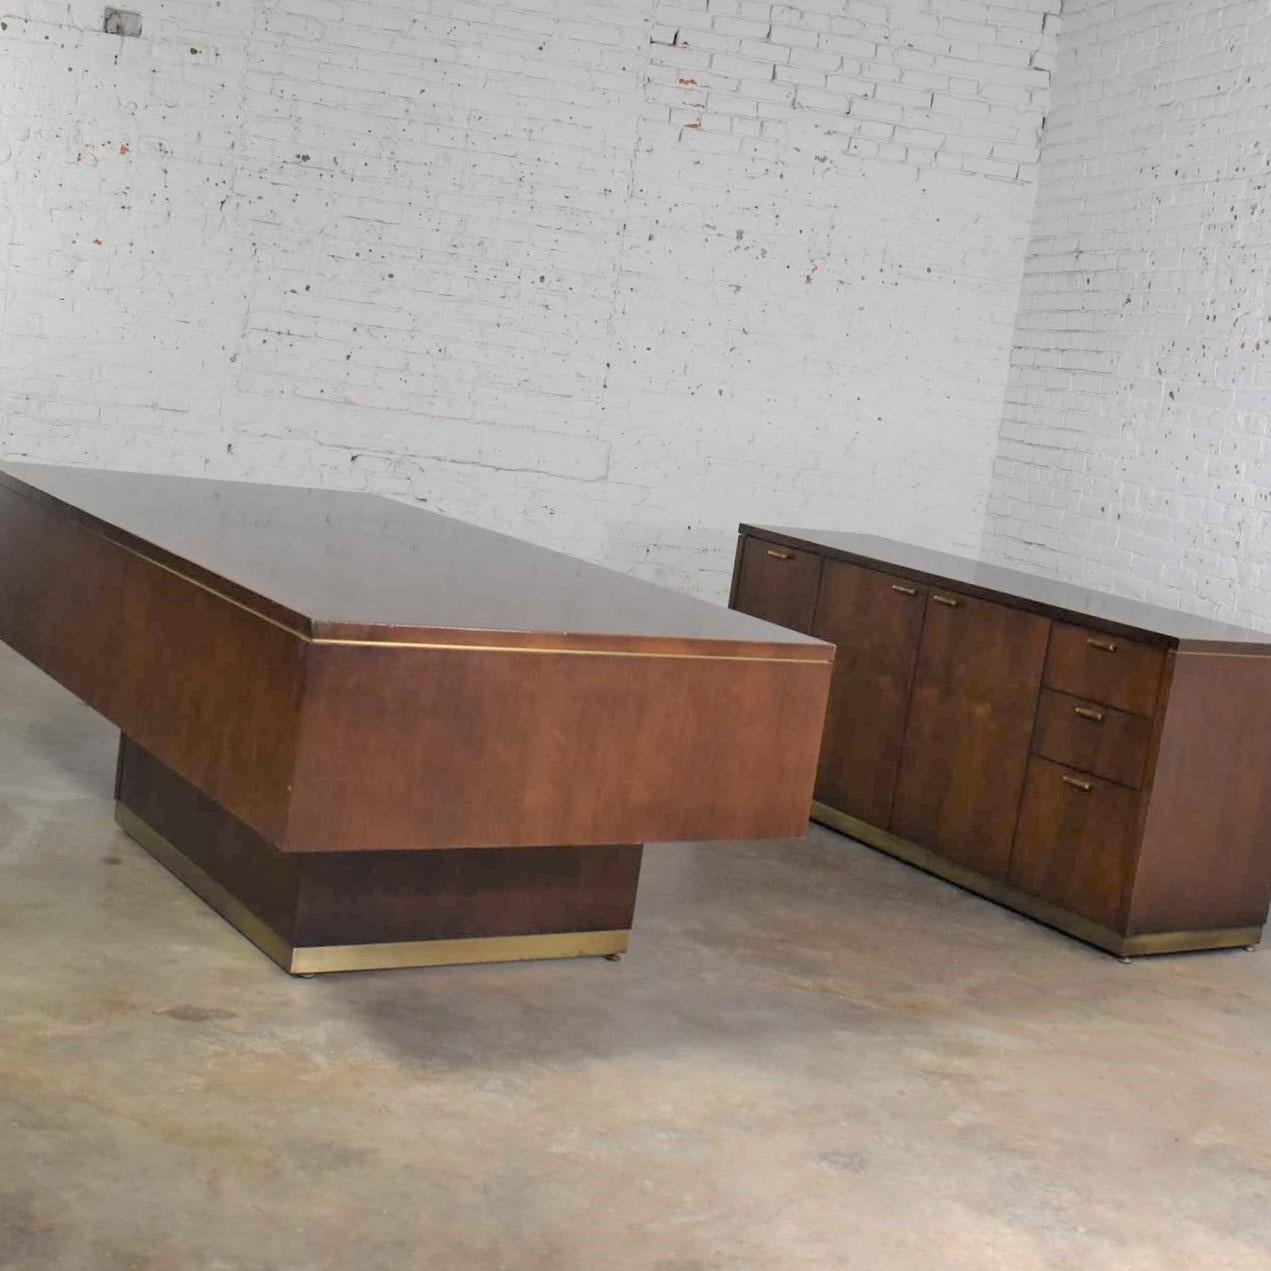 Handsome and large Mid-Century Modern cantilever executive desk and credenza by Myrtle Desk company. It is in good vintage condition. We have not refinished this desk. It retains its original finish and nicks and dings from its years of use. It